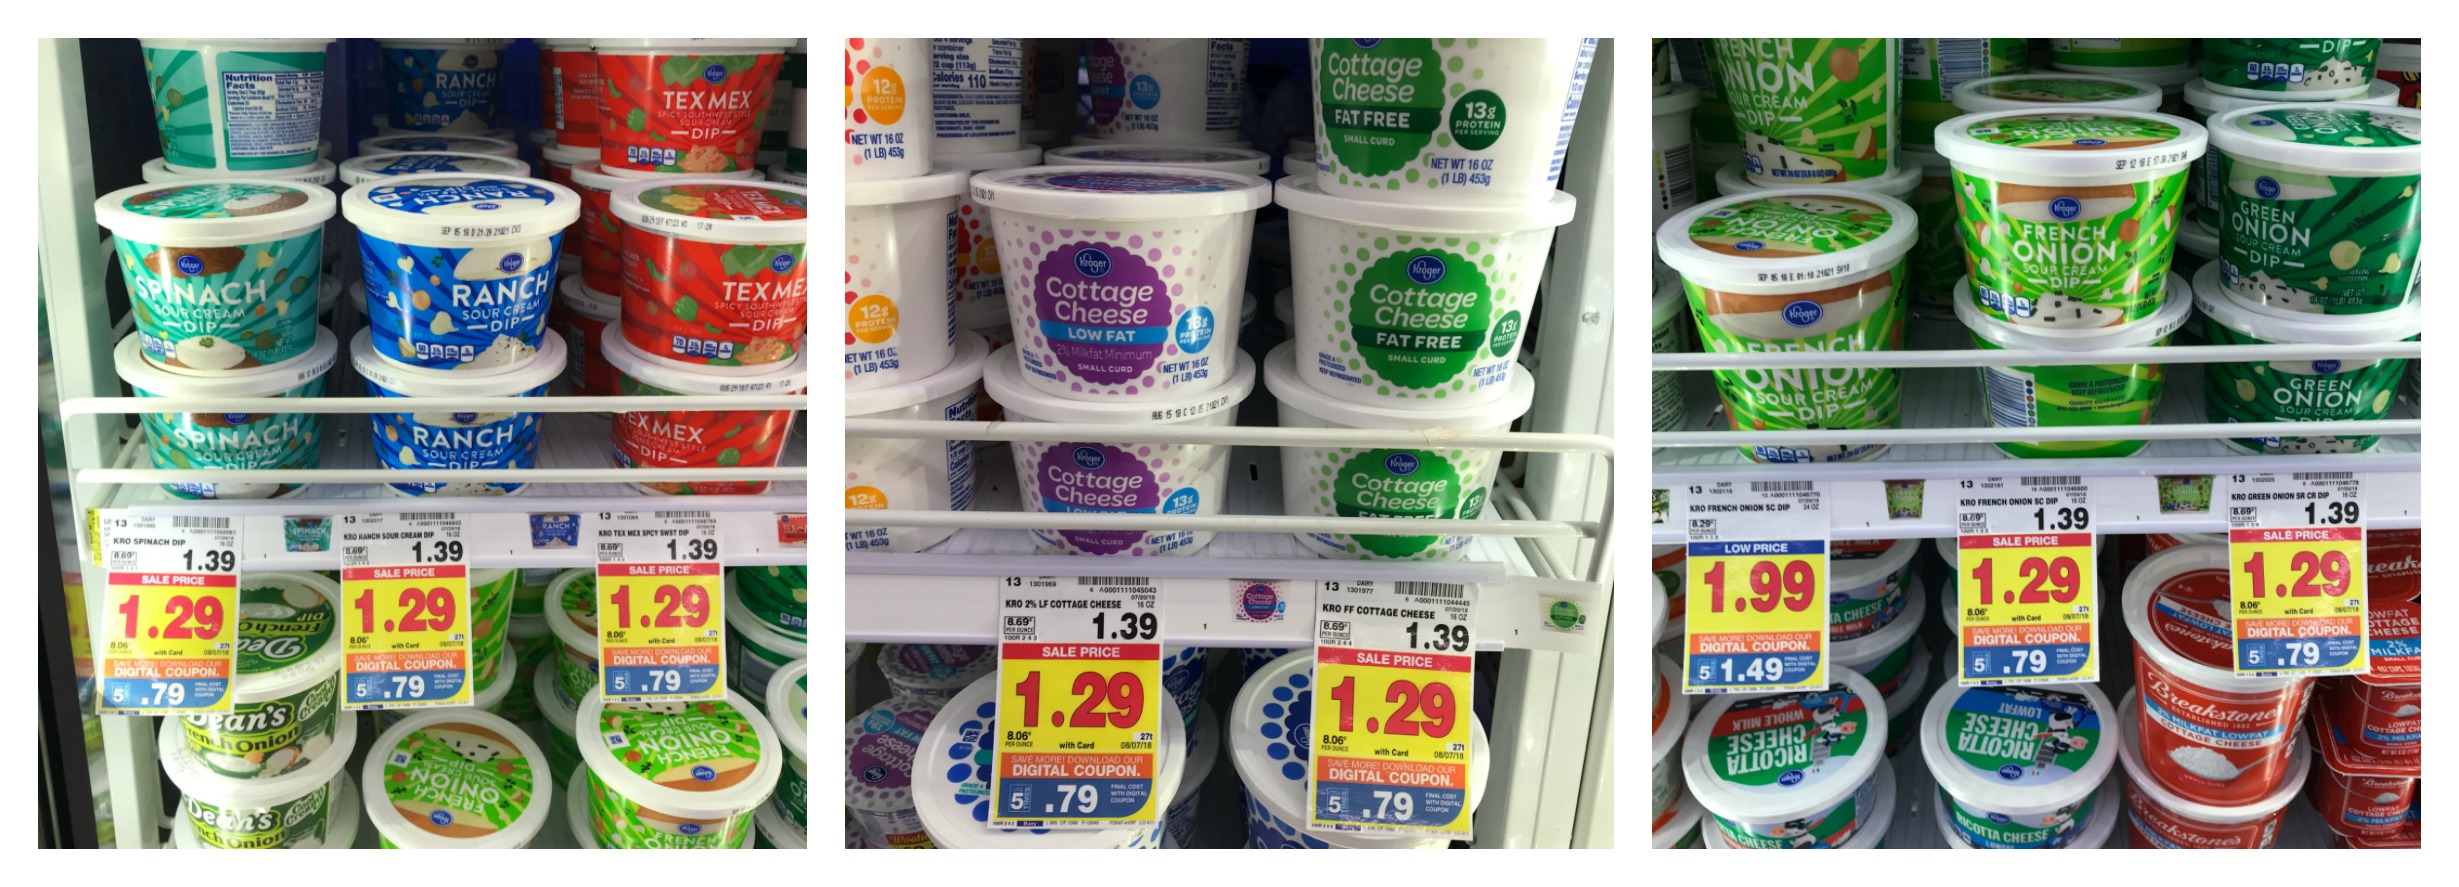 Kroger Brand Sour Cream Cottage Cheese And Dips Only 0 79 At